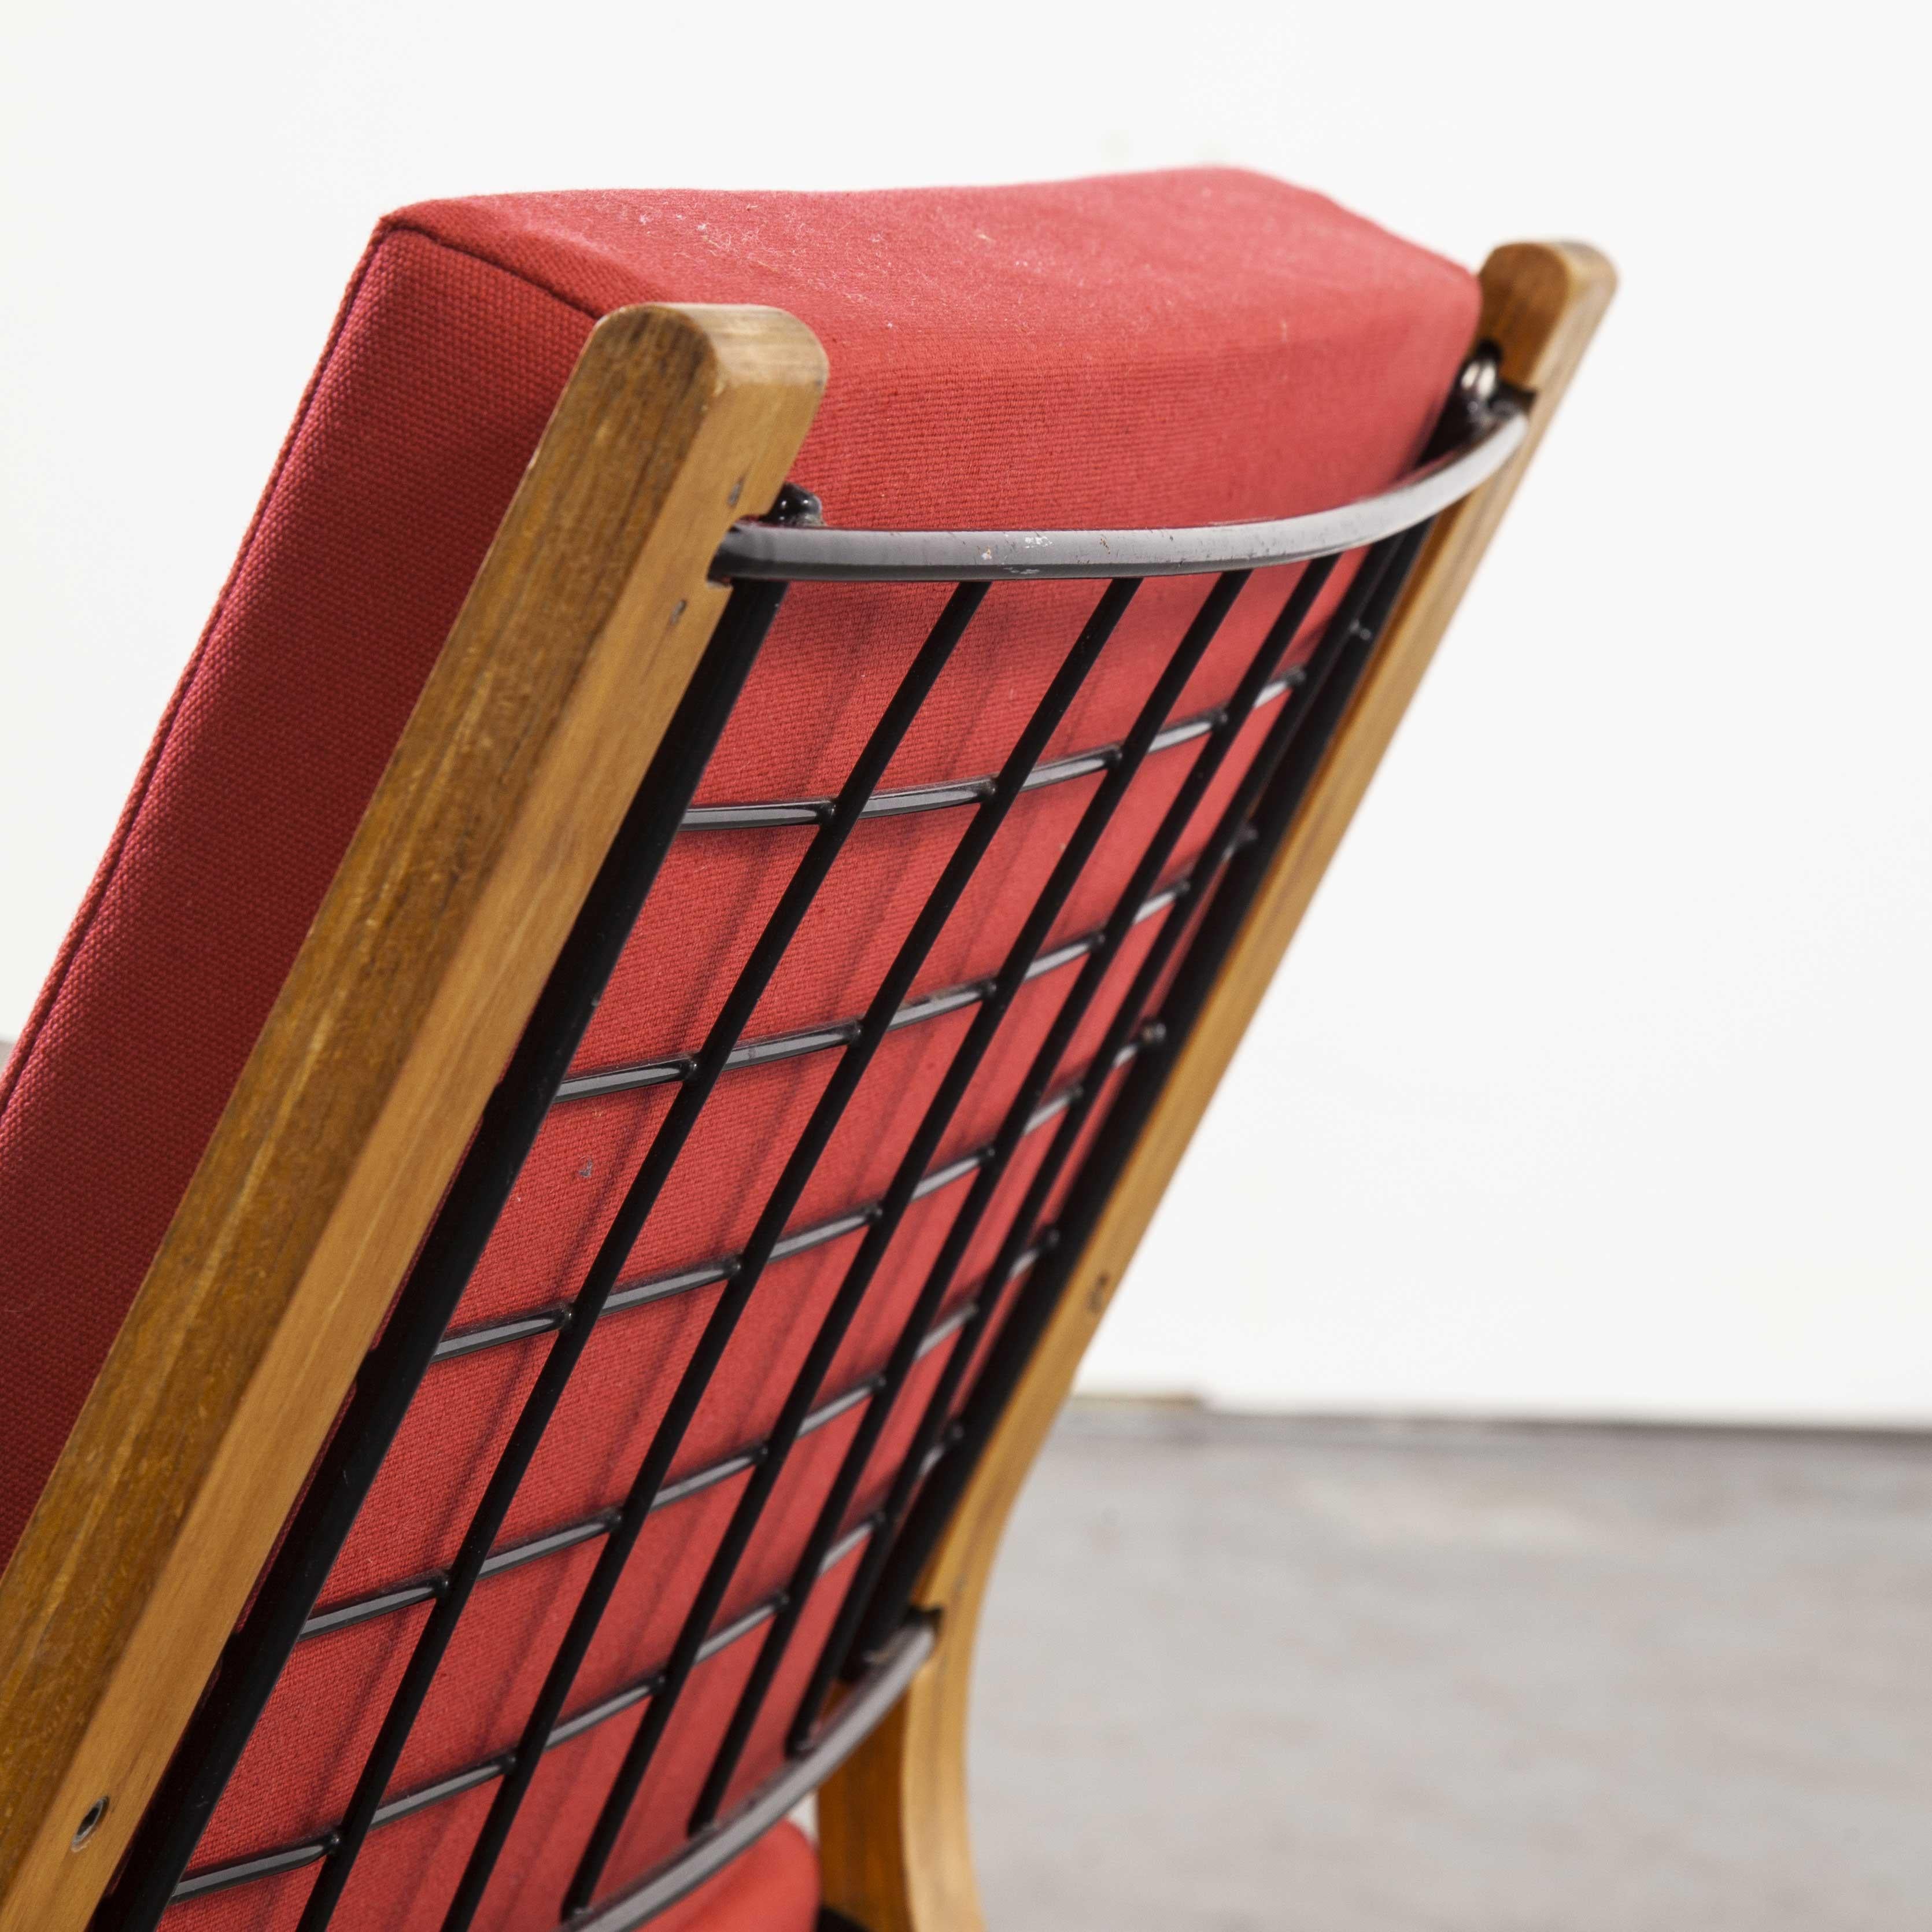 Rare Race Furniture 'Flexible' chair by Nicholas Frewing. 
This is a very rare semi-upholstered occasional chair with nylon-coated steel mesh seat and back which hook into the laminated beech frame without screws or tools. Aniline-dyed leather arms